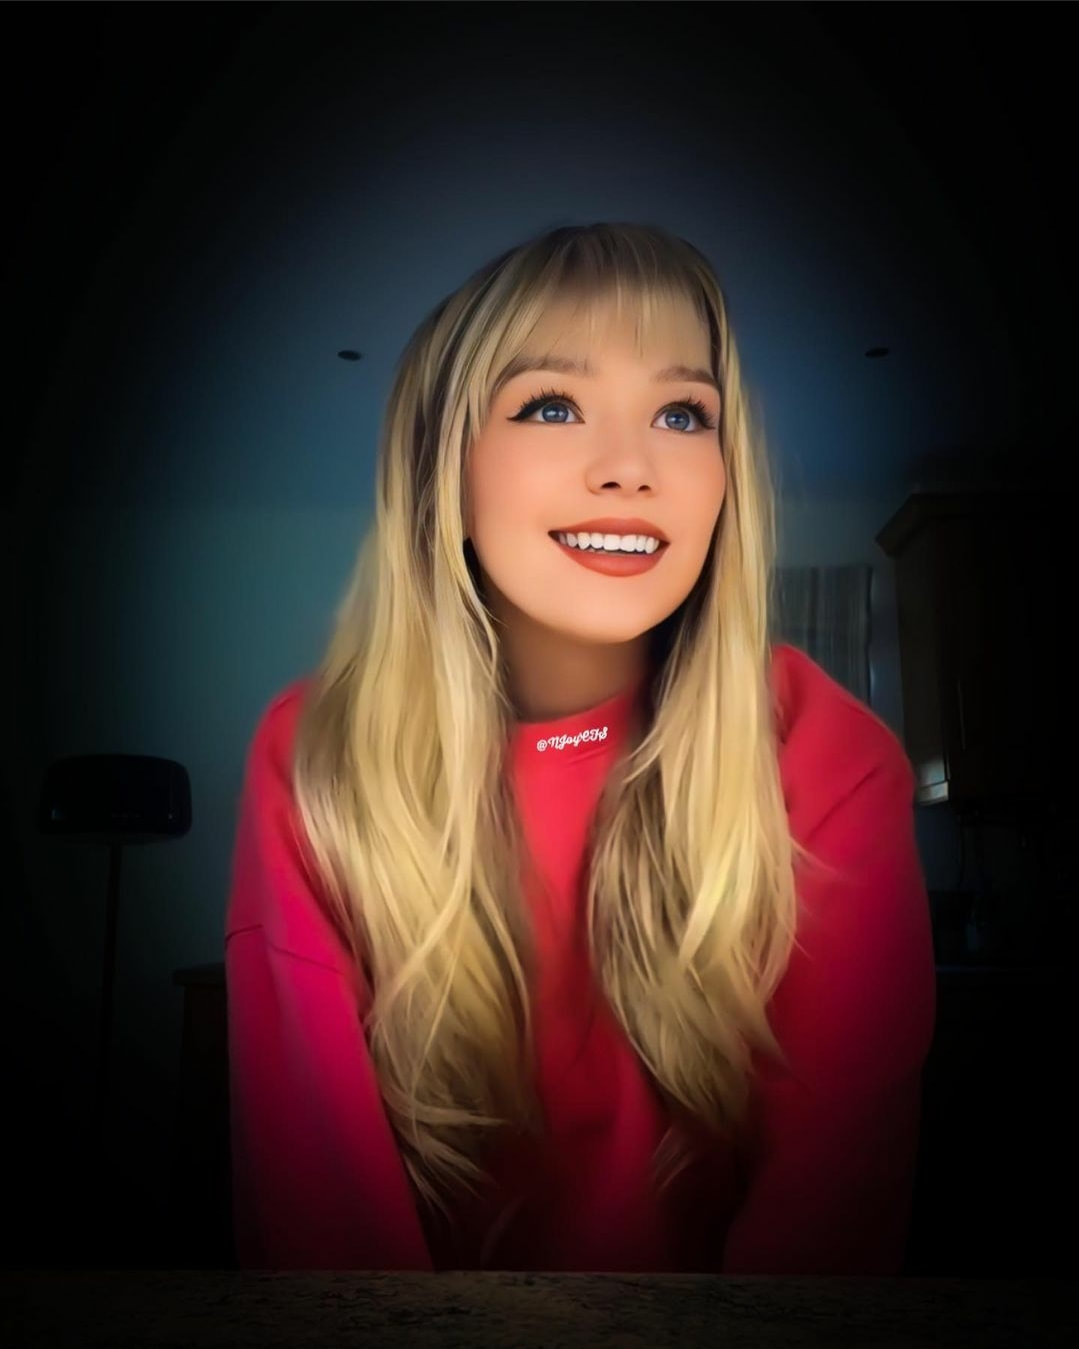 Thank You - Dido - (Connie Talbot) Cover  Thank you for listening, Connie  talbot, Dido